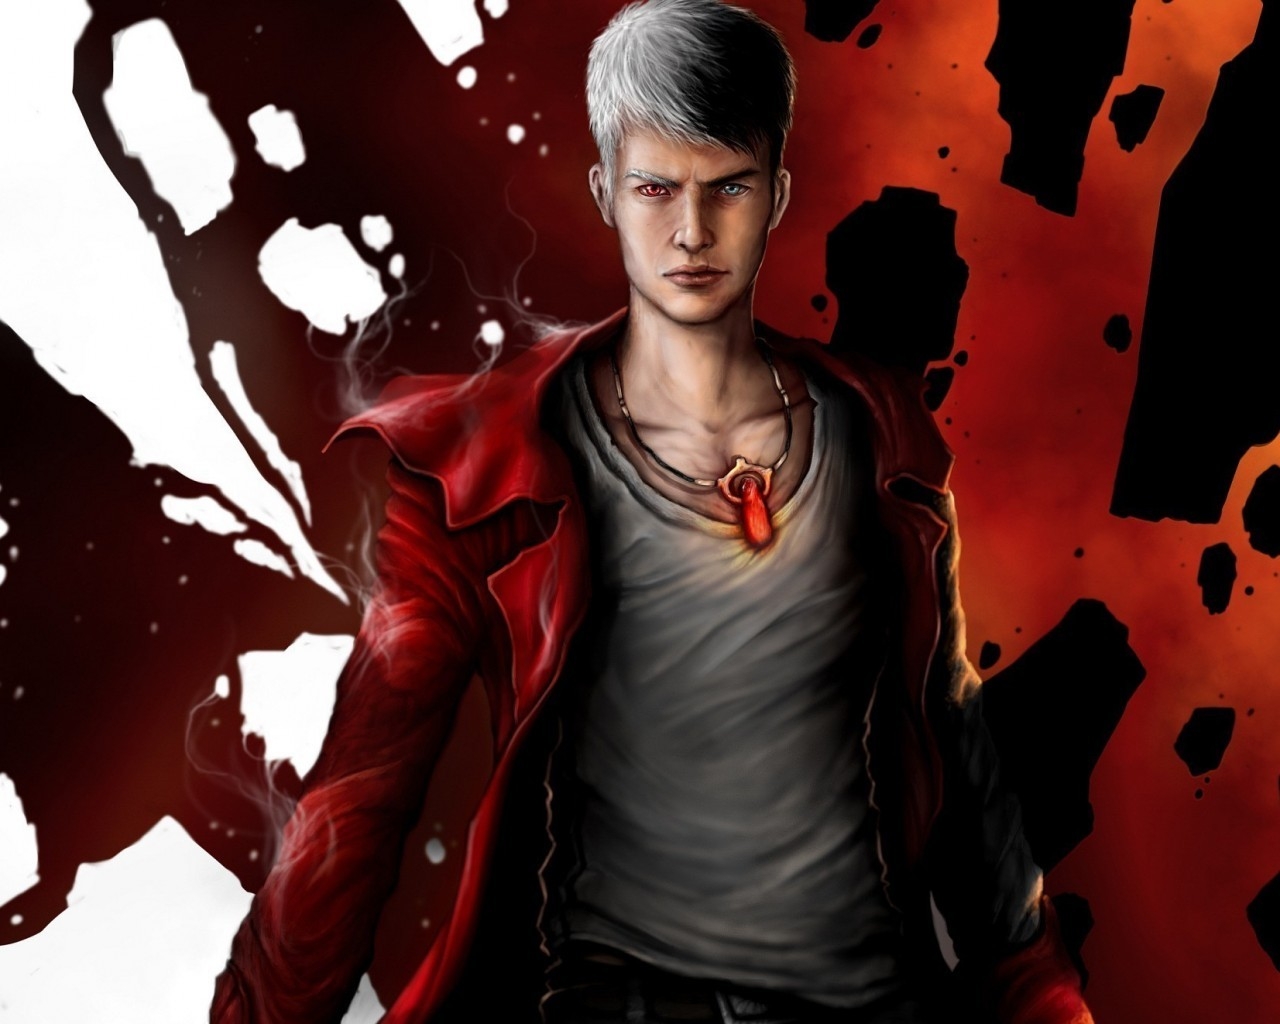 Dante from Devil May Cry for 1280 x 1024 resolution